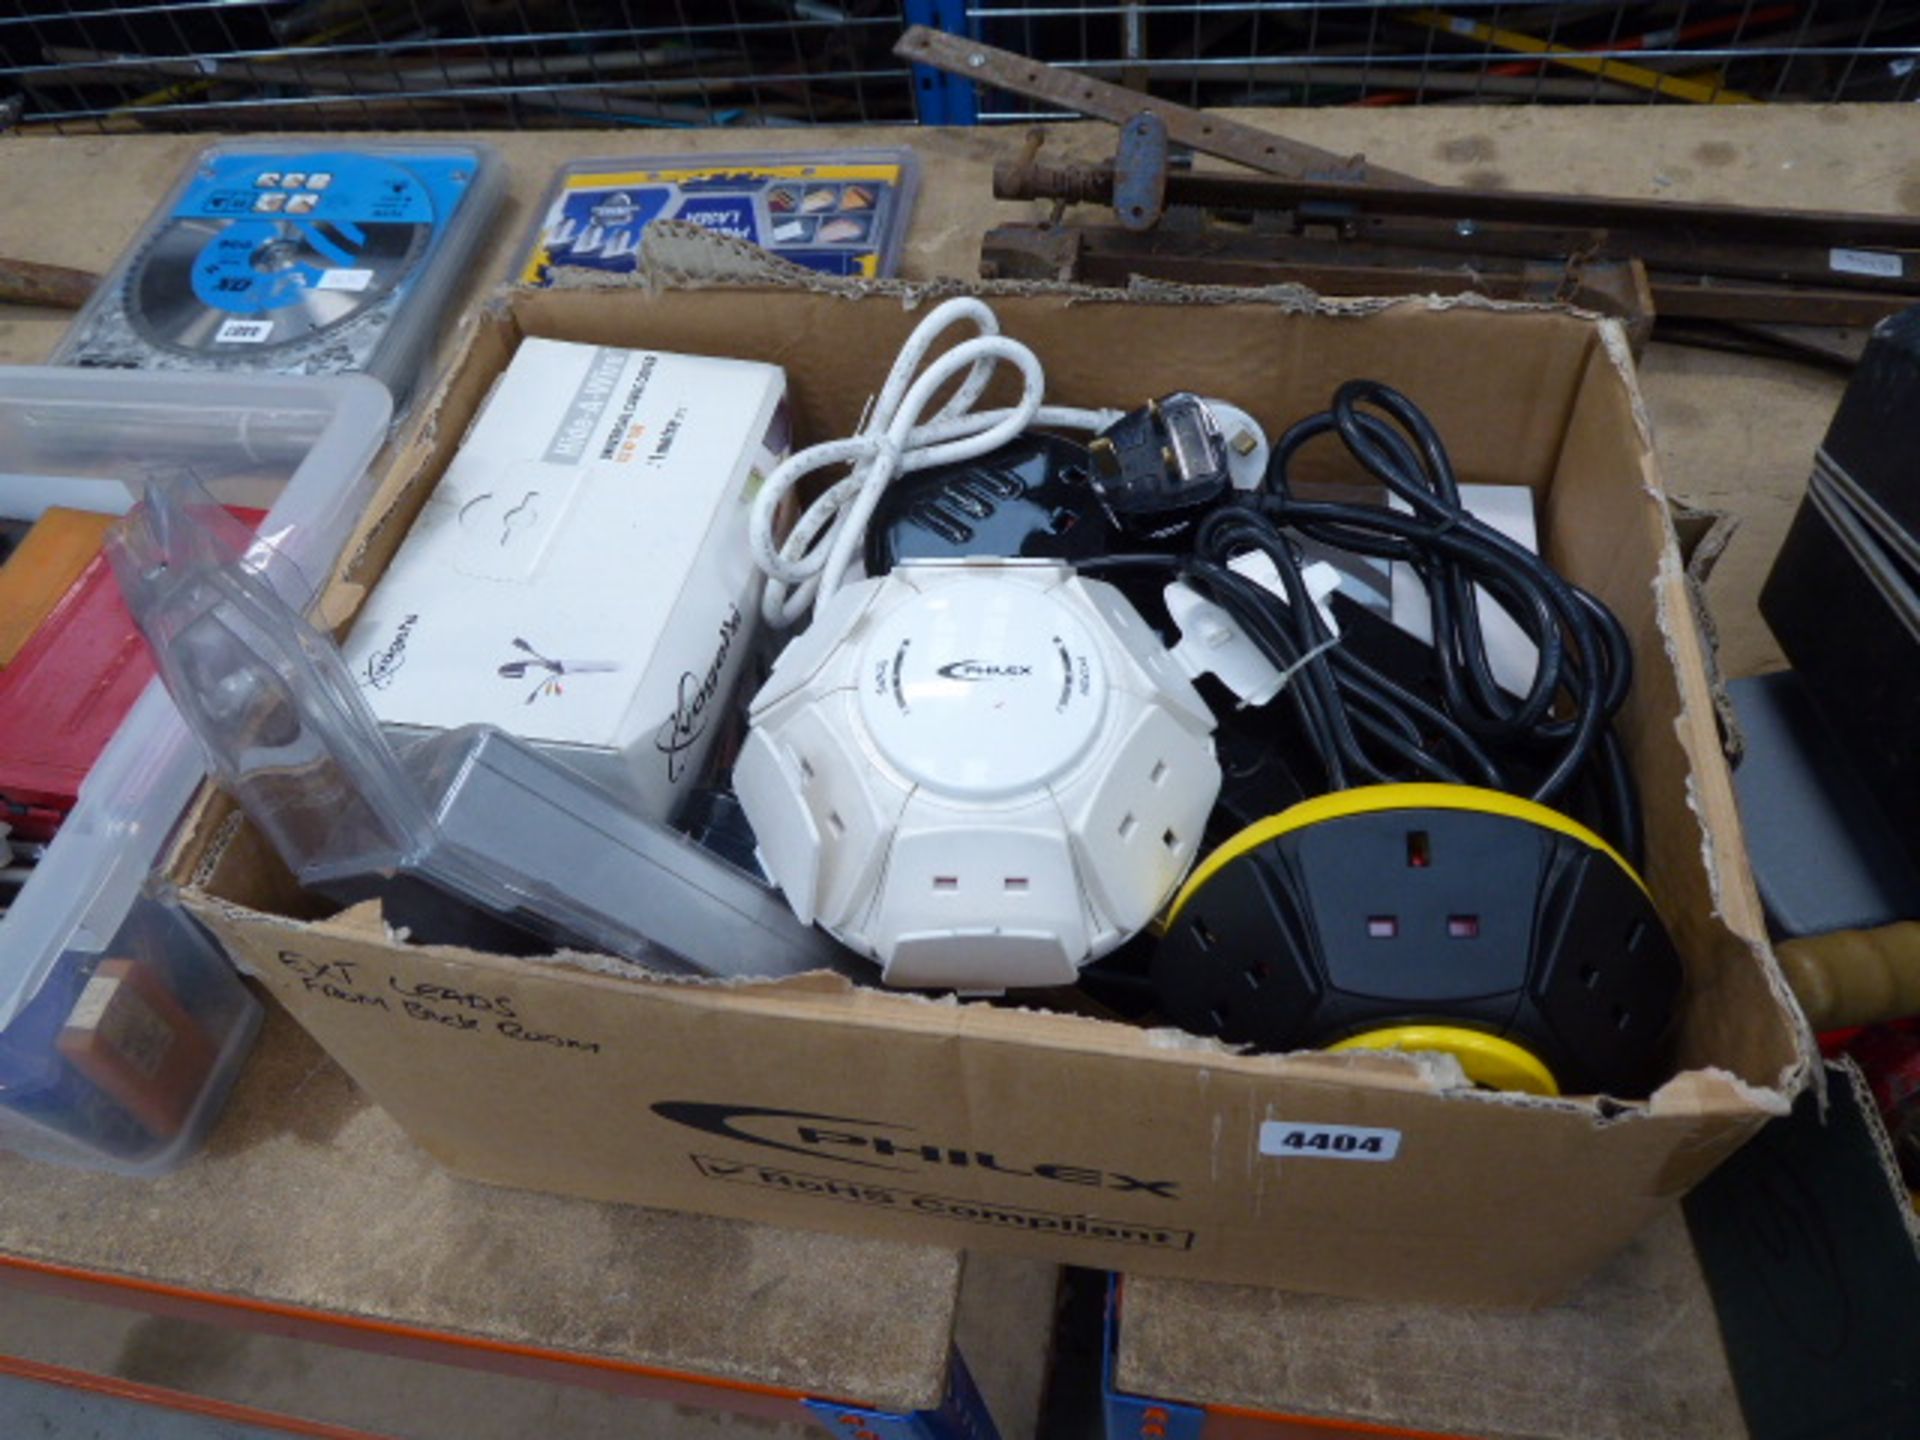 Box of extension cables